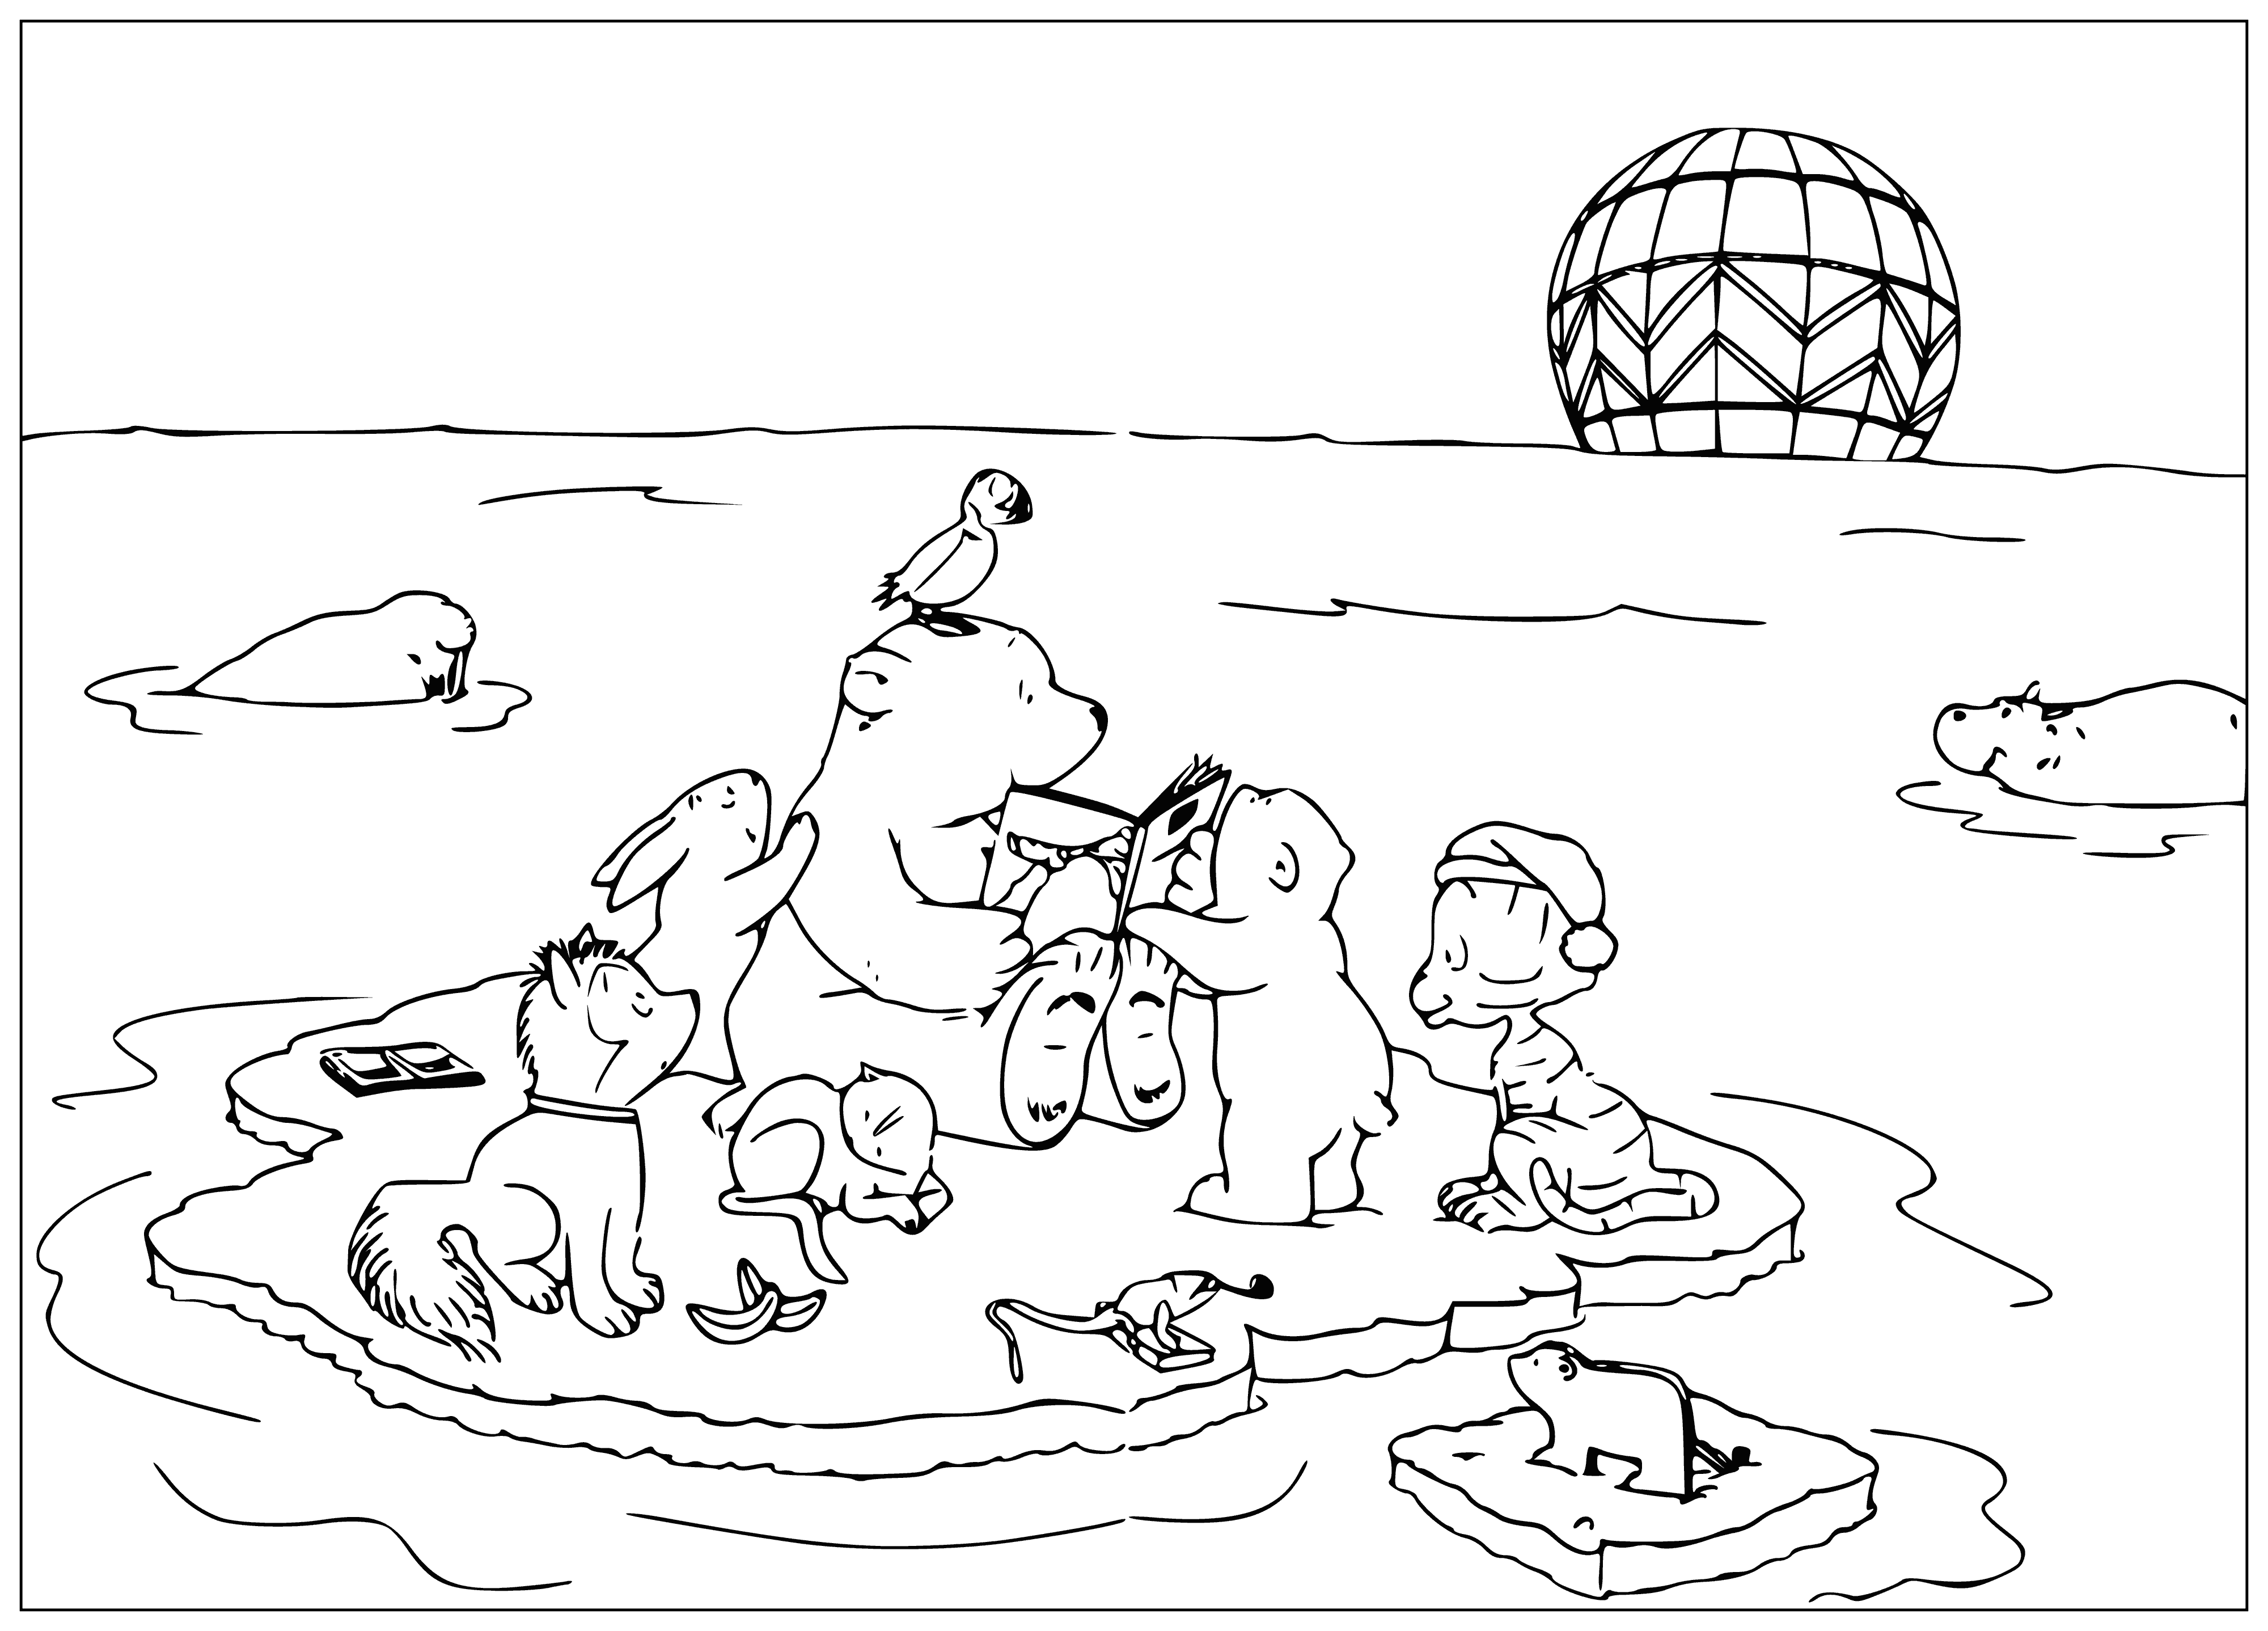 coloring page: A little polar bear standing on some ice reaches for a fish in the water in the coloring page. #coloringpage #polarbear #fish